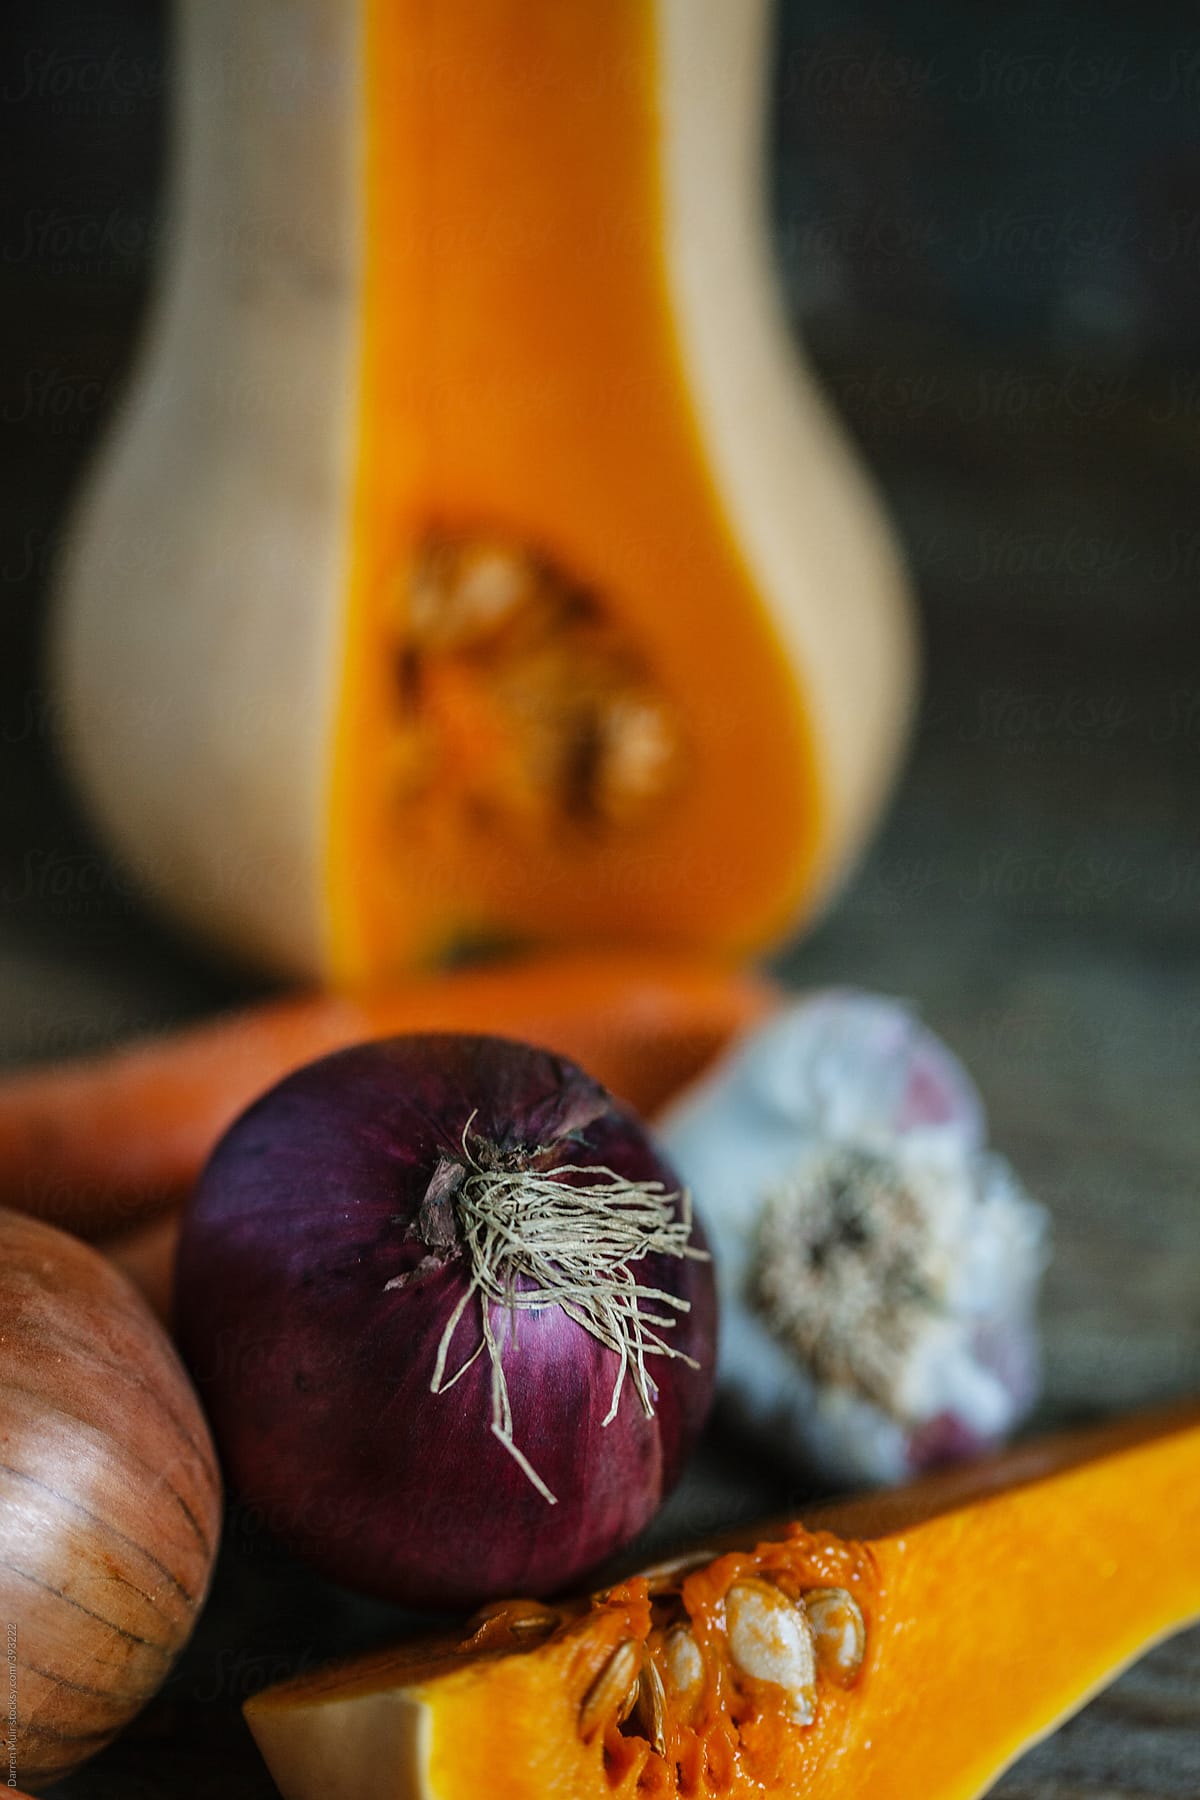 Ingredients for butternut squash soup.